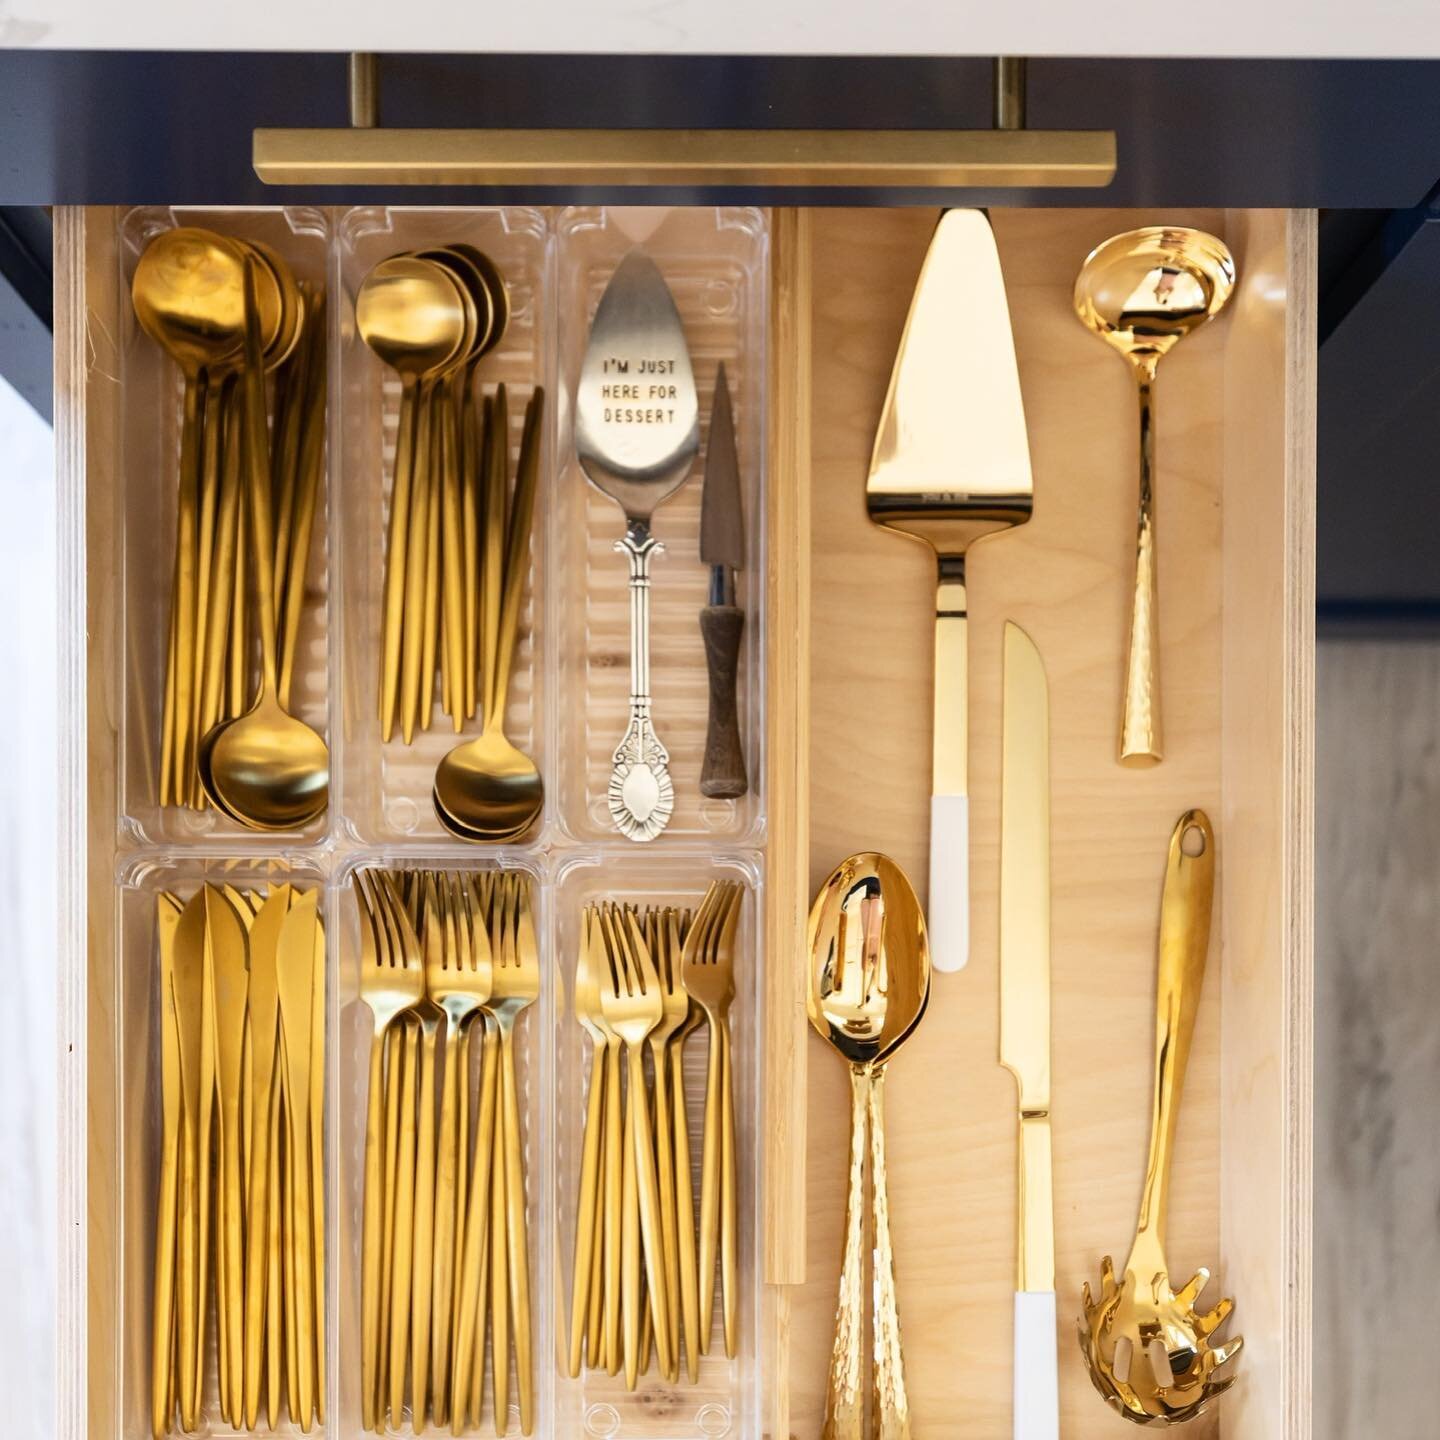 When you have silverware (or is it called goldware?) this pretty- it only makes sense to have it organized!

SAVE THIS POST FOR KITCHEN INSPIRATION!

#marthastewartliving #showmeyourstyle #organizationalinspo #homesolutions #declutteryourhome #declut